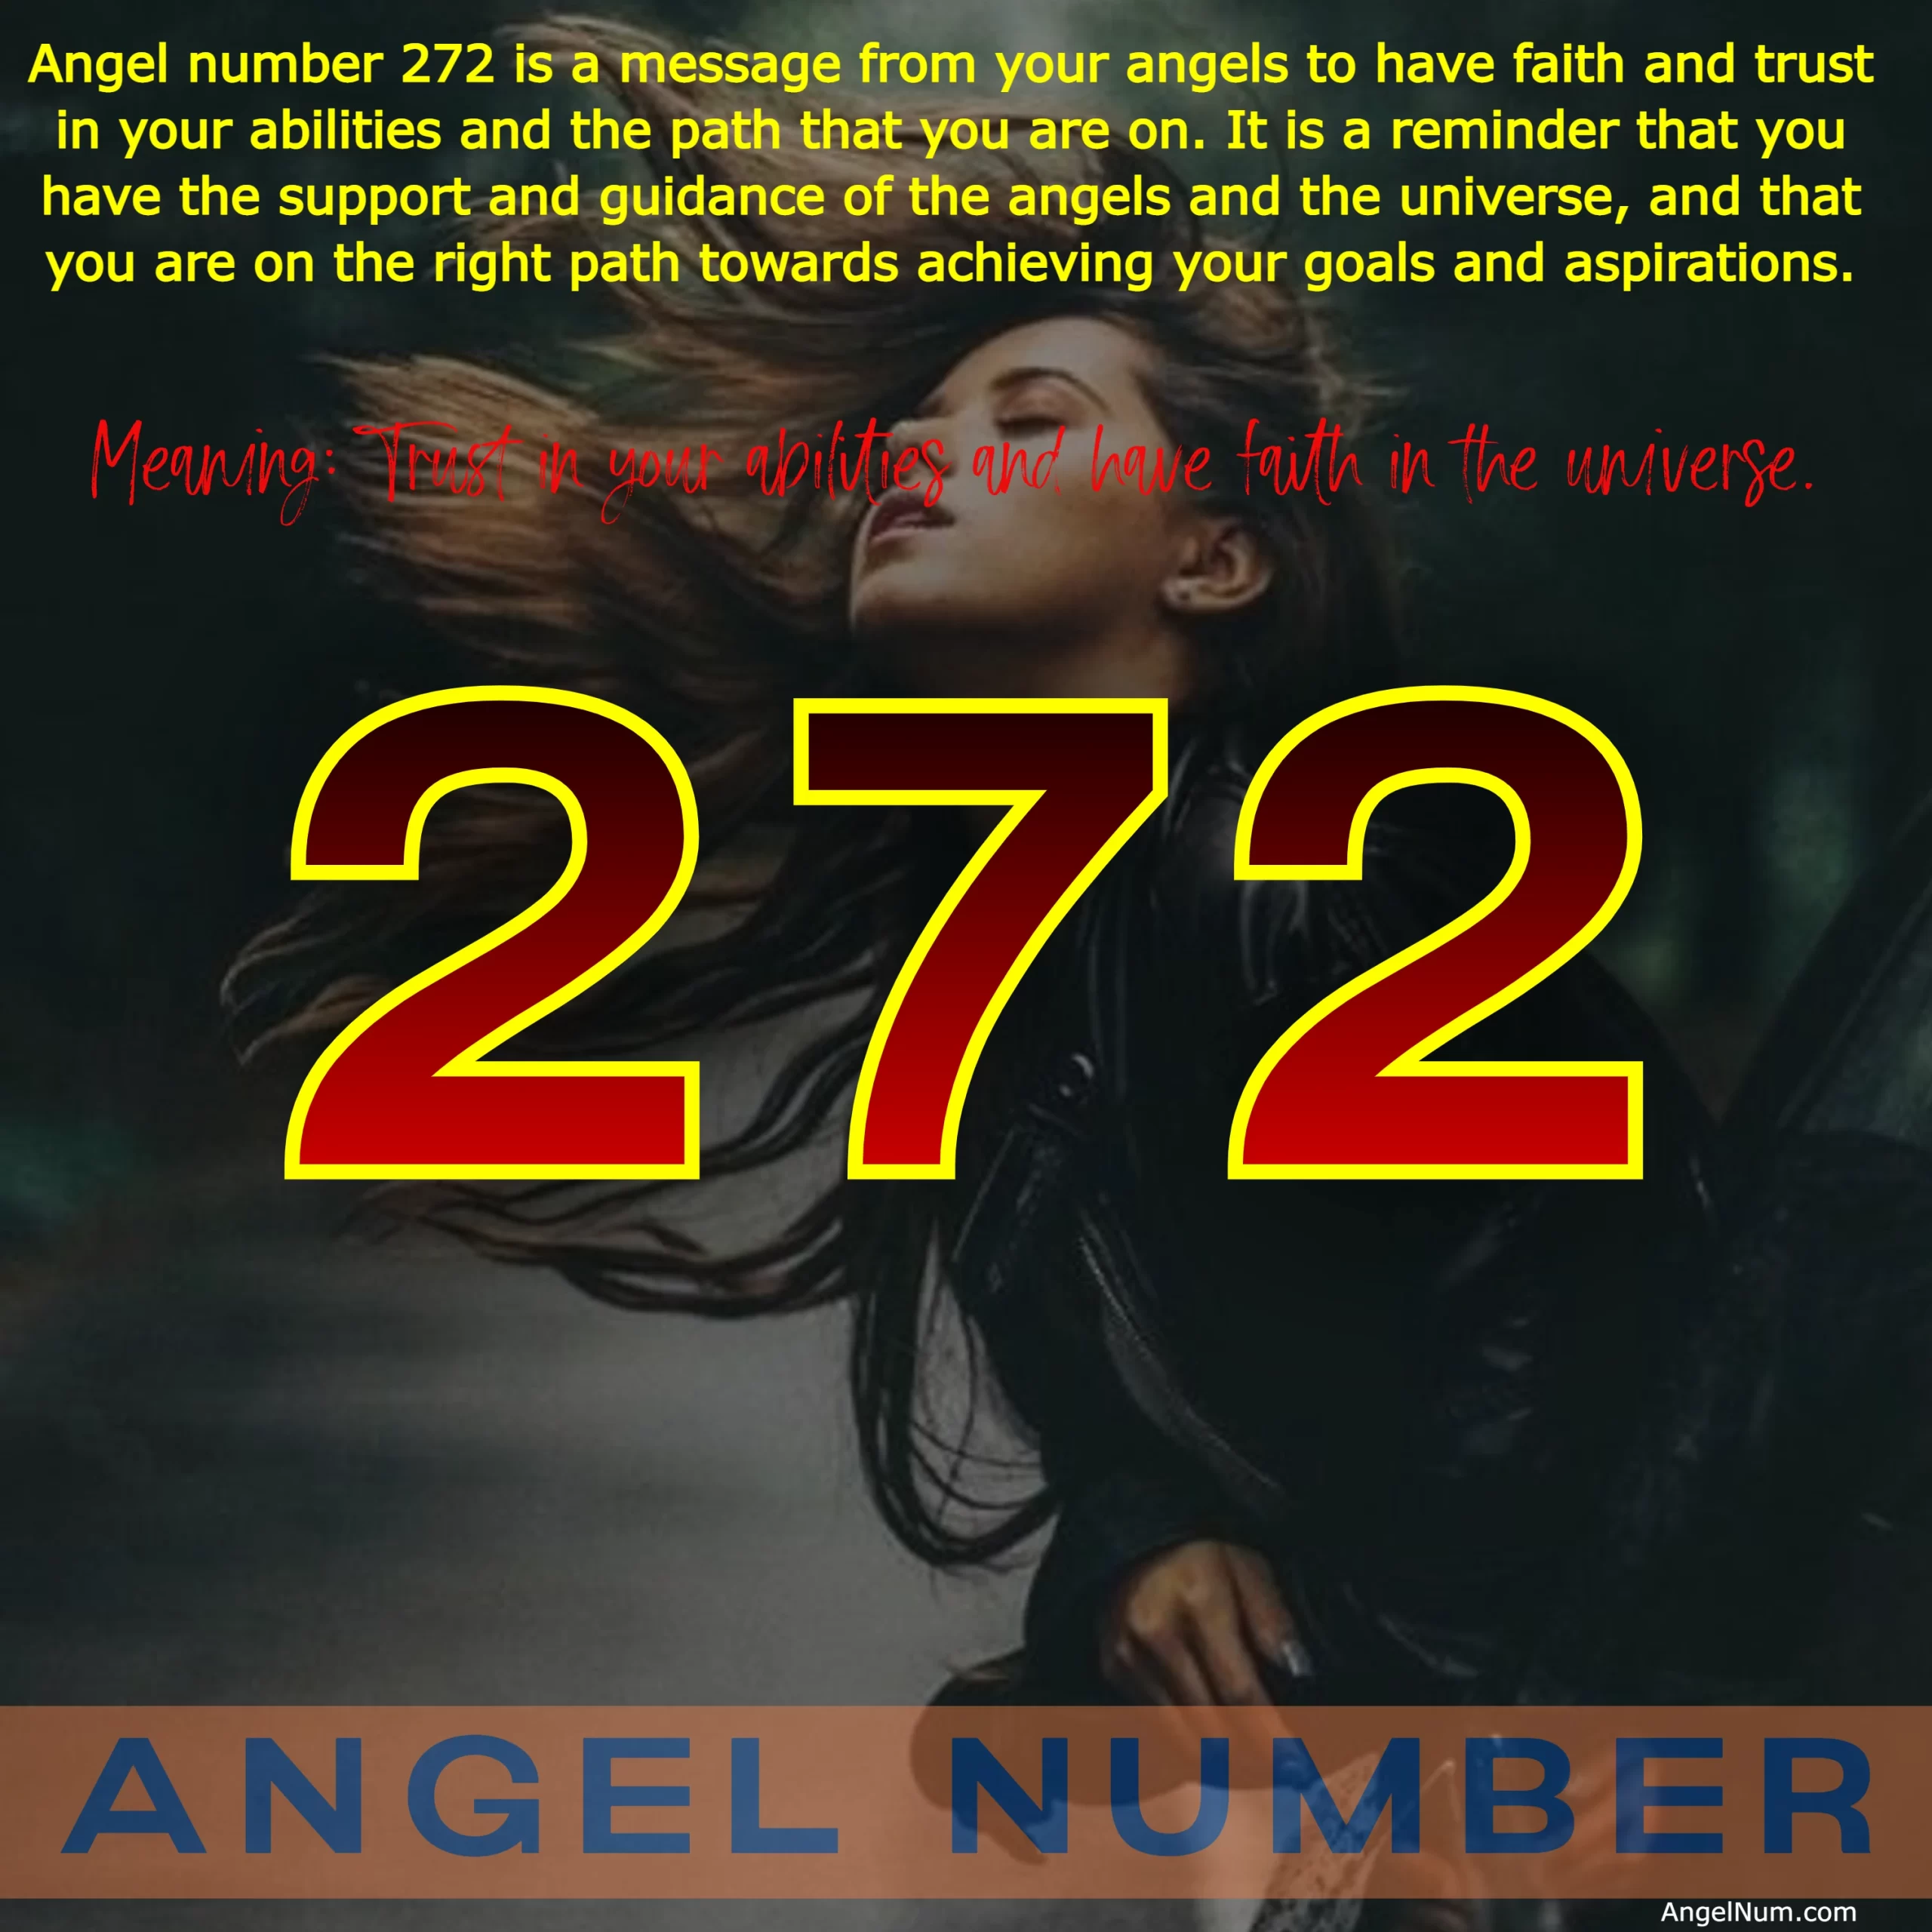 Angel Number 272: Trust in Your Abilities and Have Faith in the Universe